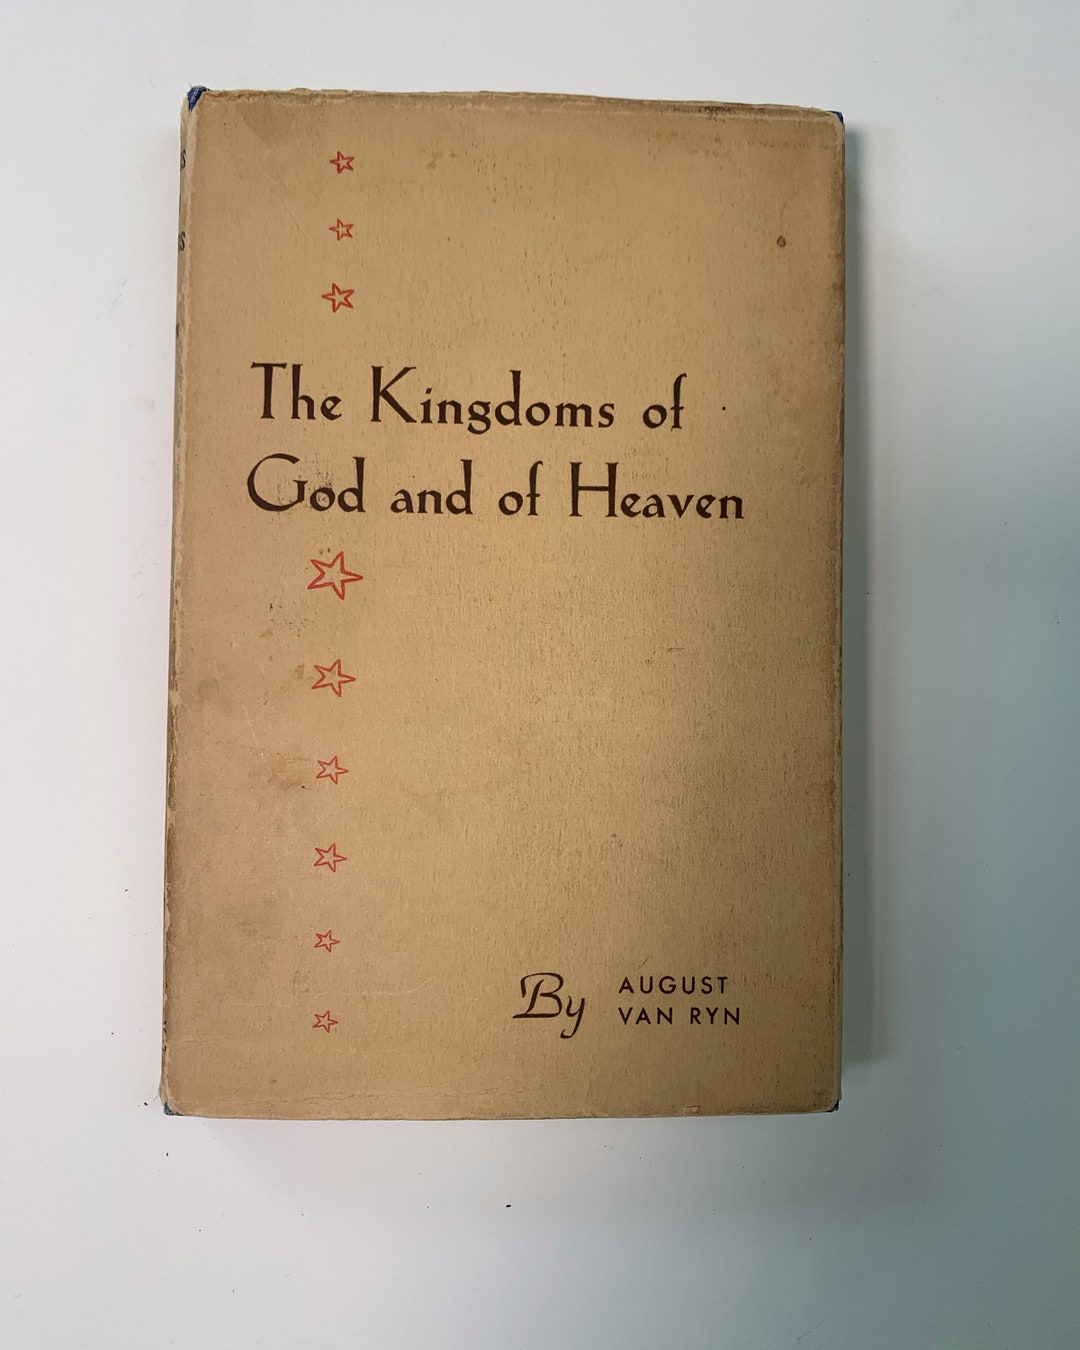 The Kingdoms of God and of Heaven 1946 by August Van Ryn - Etsy